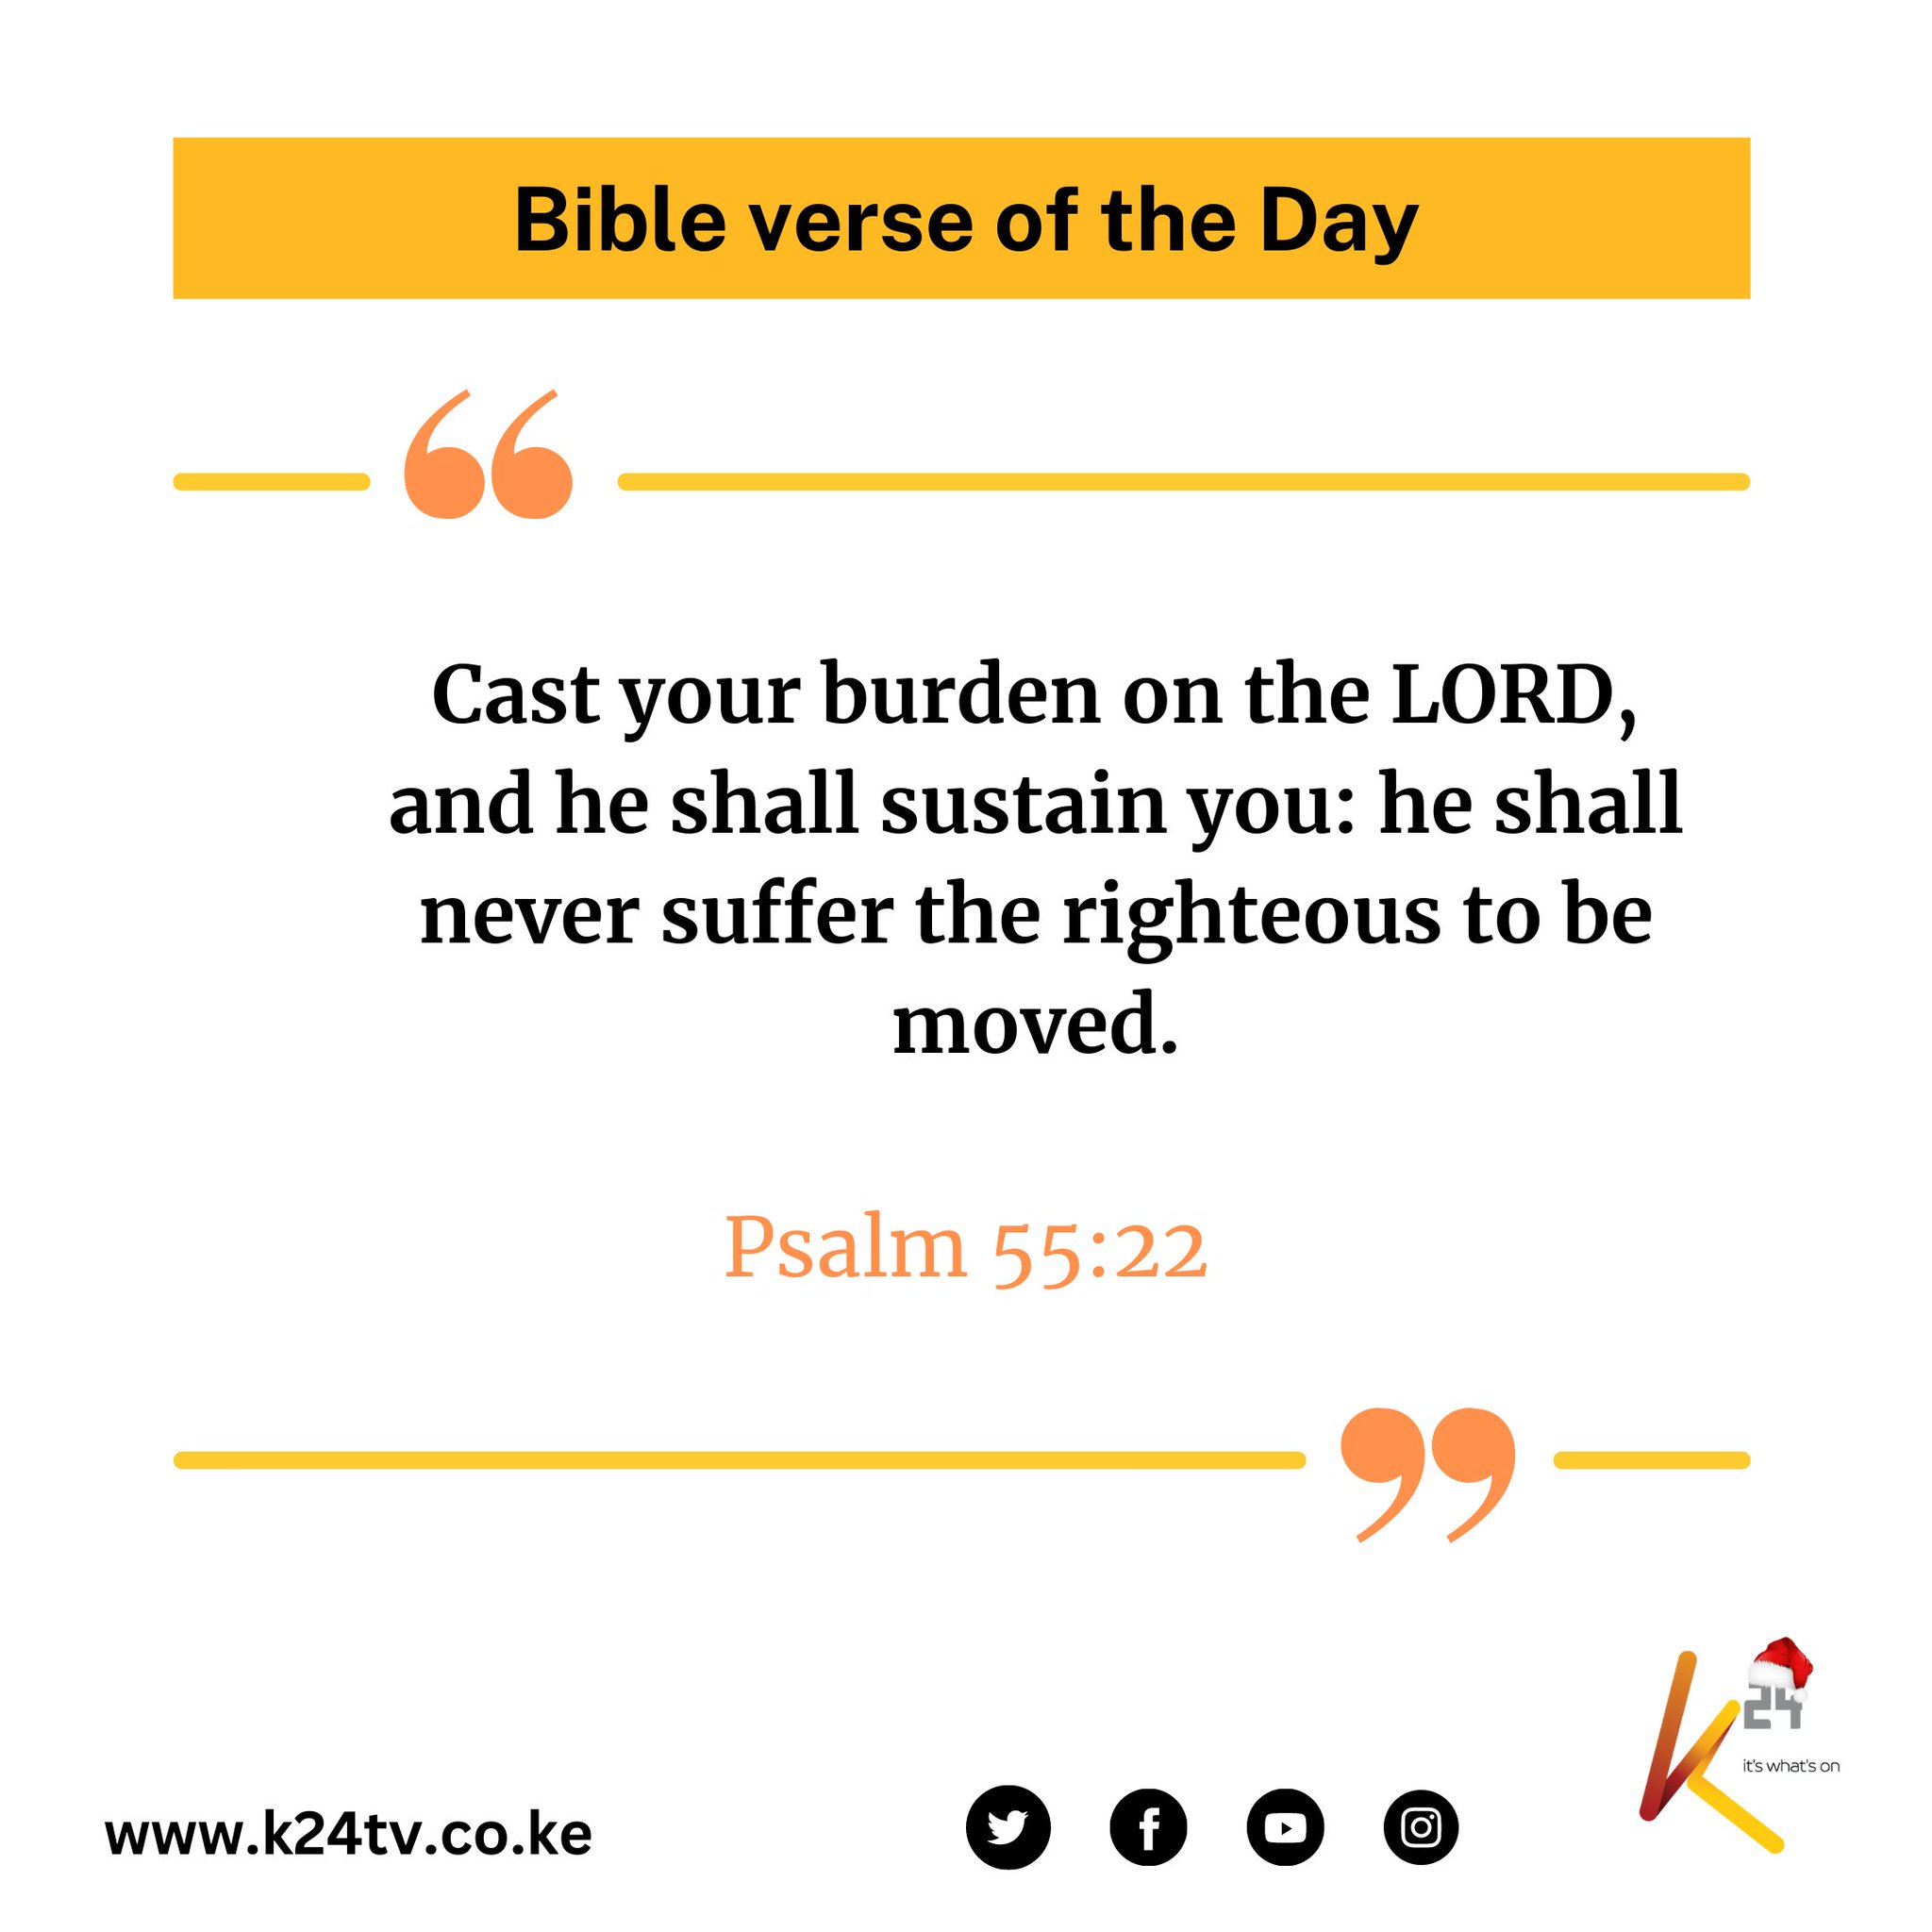 Bible verse of the 66 Cast your burden on the LORD, and he shall sustain you: he shall never suffer the righteous to be moved. Psalm 55.22 WWW.k24tv.co.ke Day